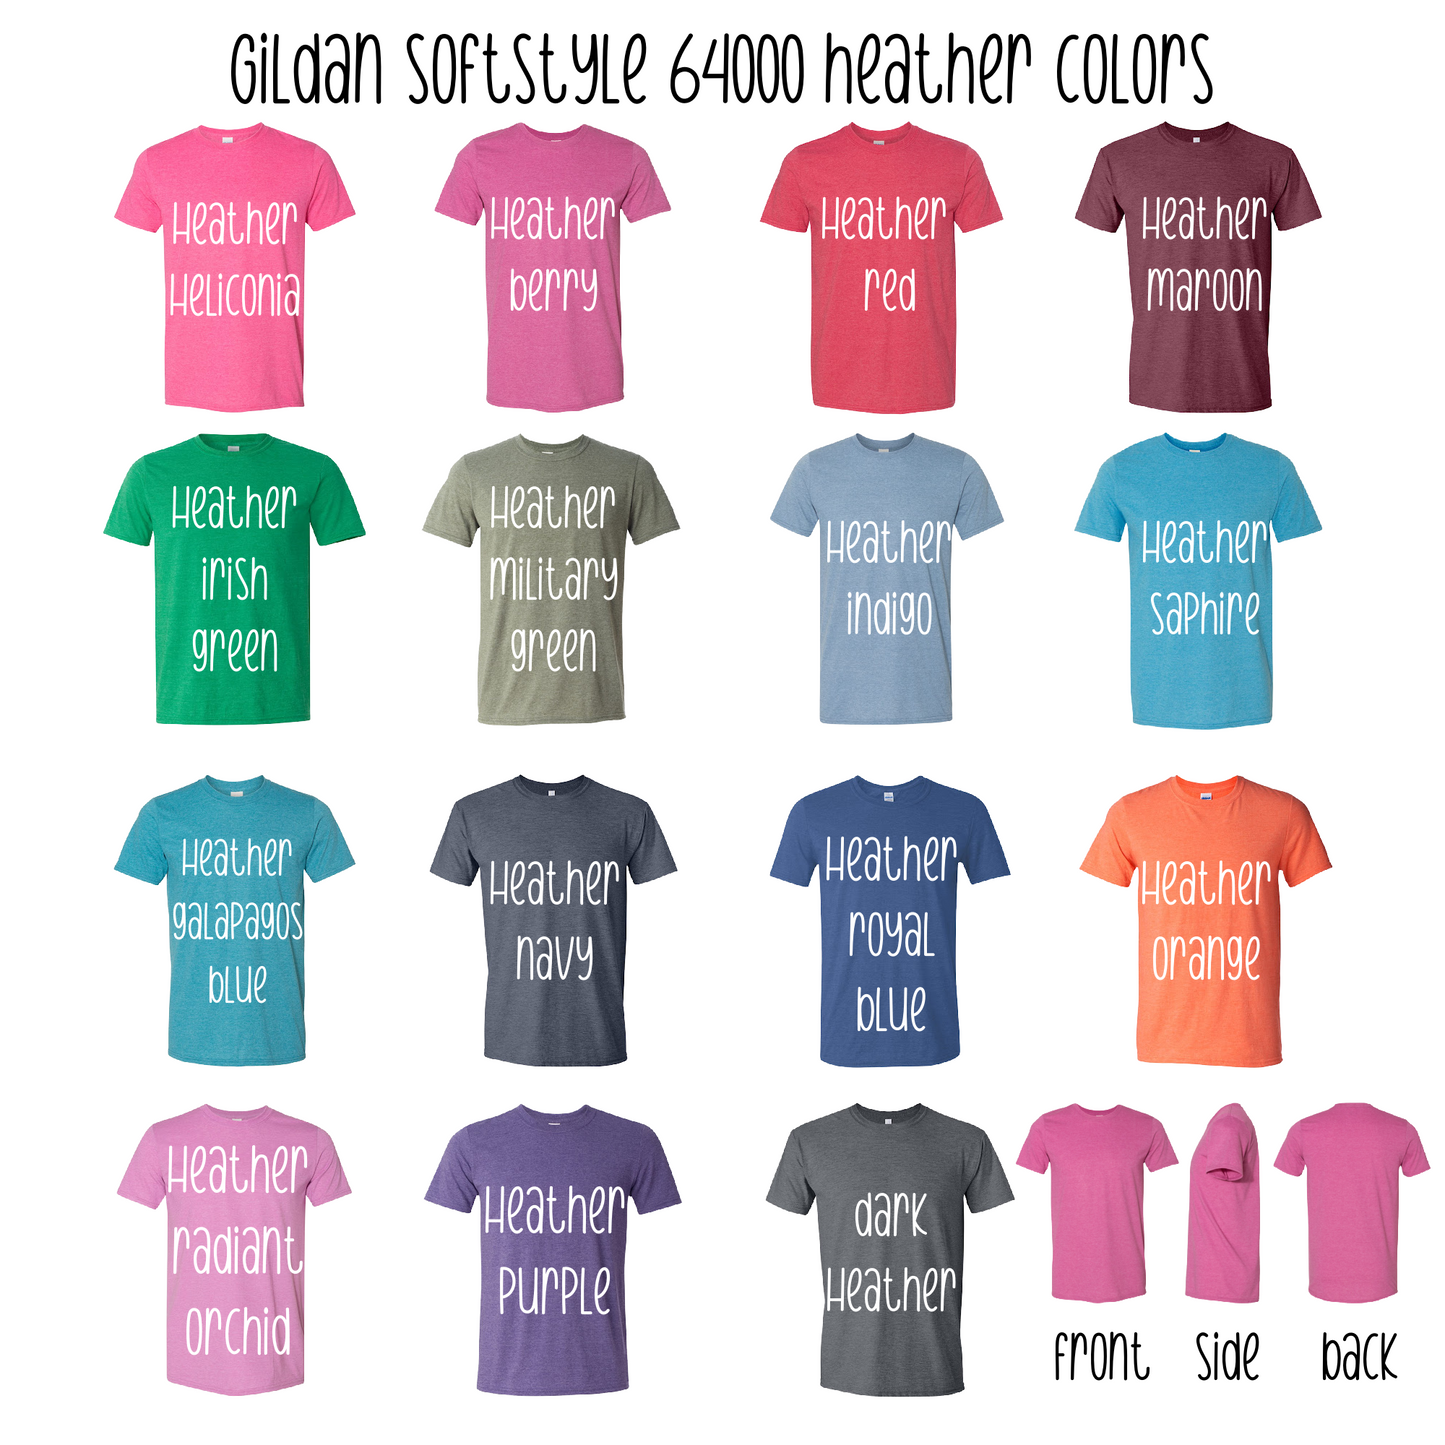 Hold On Let Me Overthink This - Sarcastic Soft Style T-Shirt (Choose your shirt color)